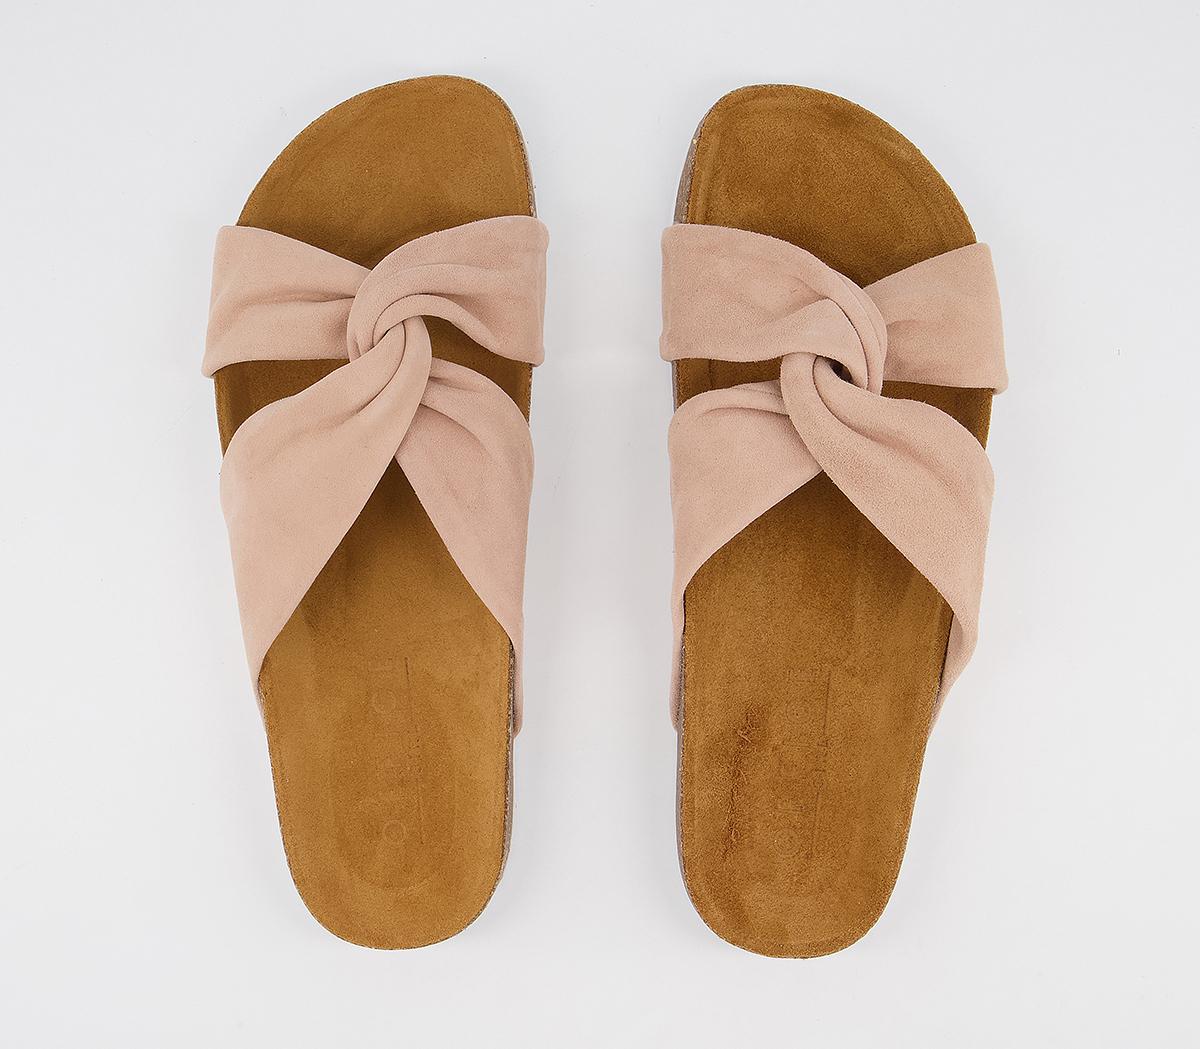 OFFICE Sustain Twisted Footbed Flat Sandals Blush Suede - Women’s Sandals